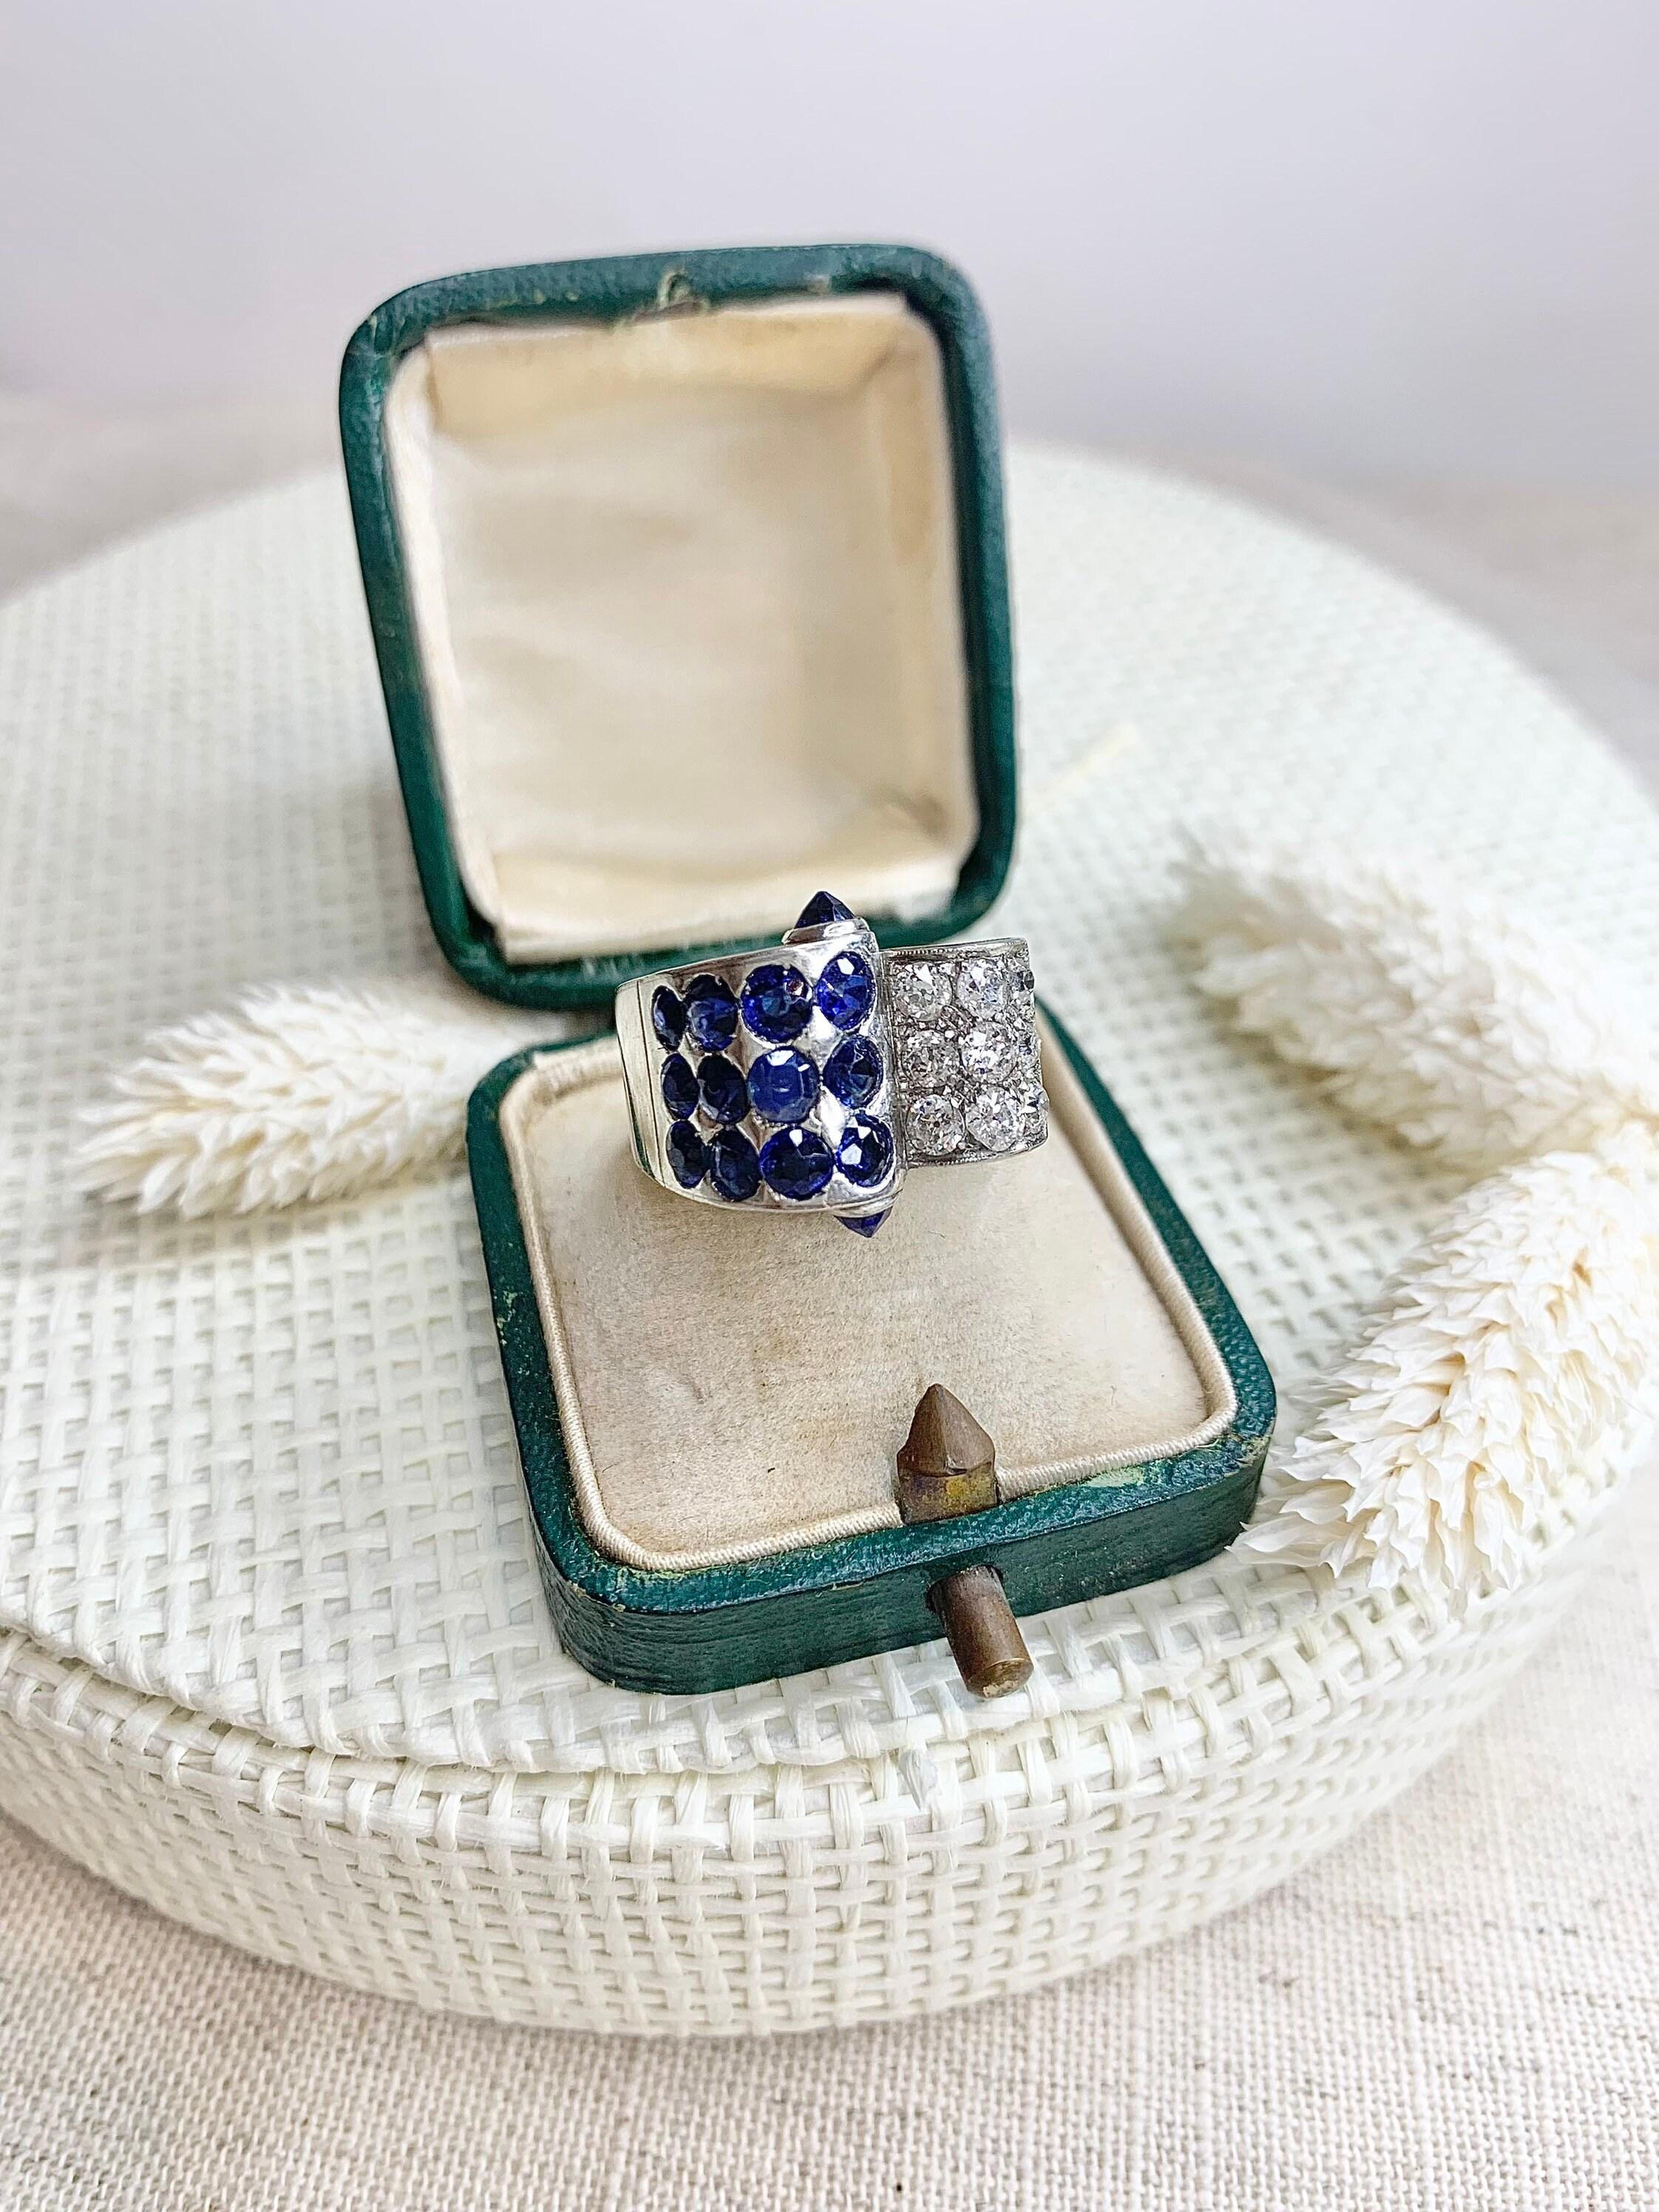 Vintage Sapphire & Diamond Cocktail Ring 

Platinum 

Circa 1940s 

This Ring Definitely Has The Wow Factor!
Set with Gorgeous Blue Sapphires & Fabulous Old Cut Diamonds, The Detail & Design is so Original. This Ring Has Absolute Style! 

UK Size M